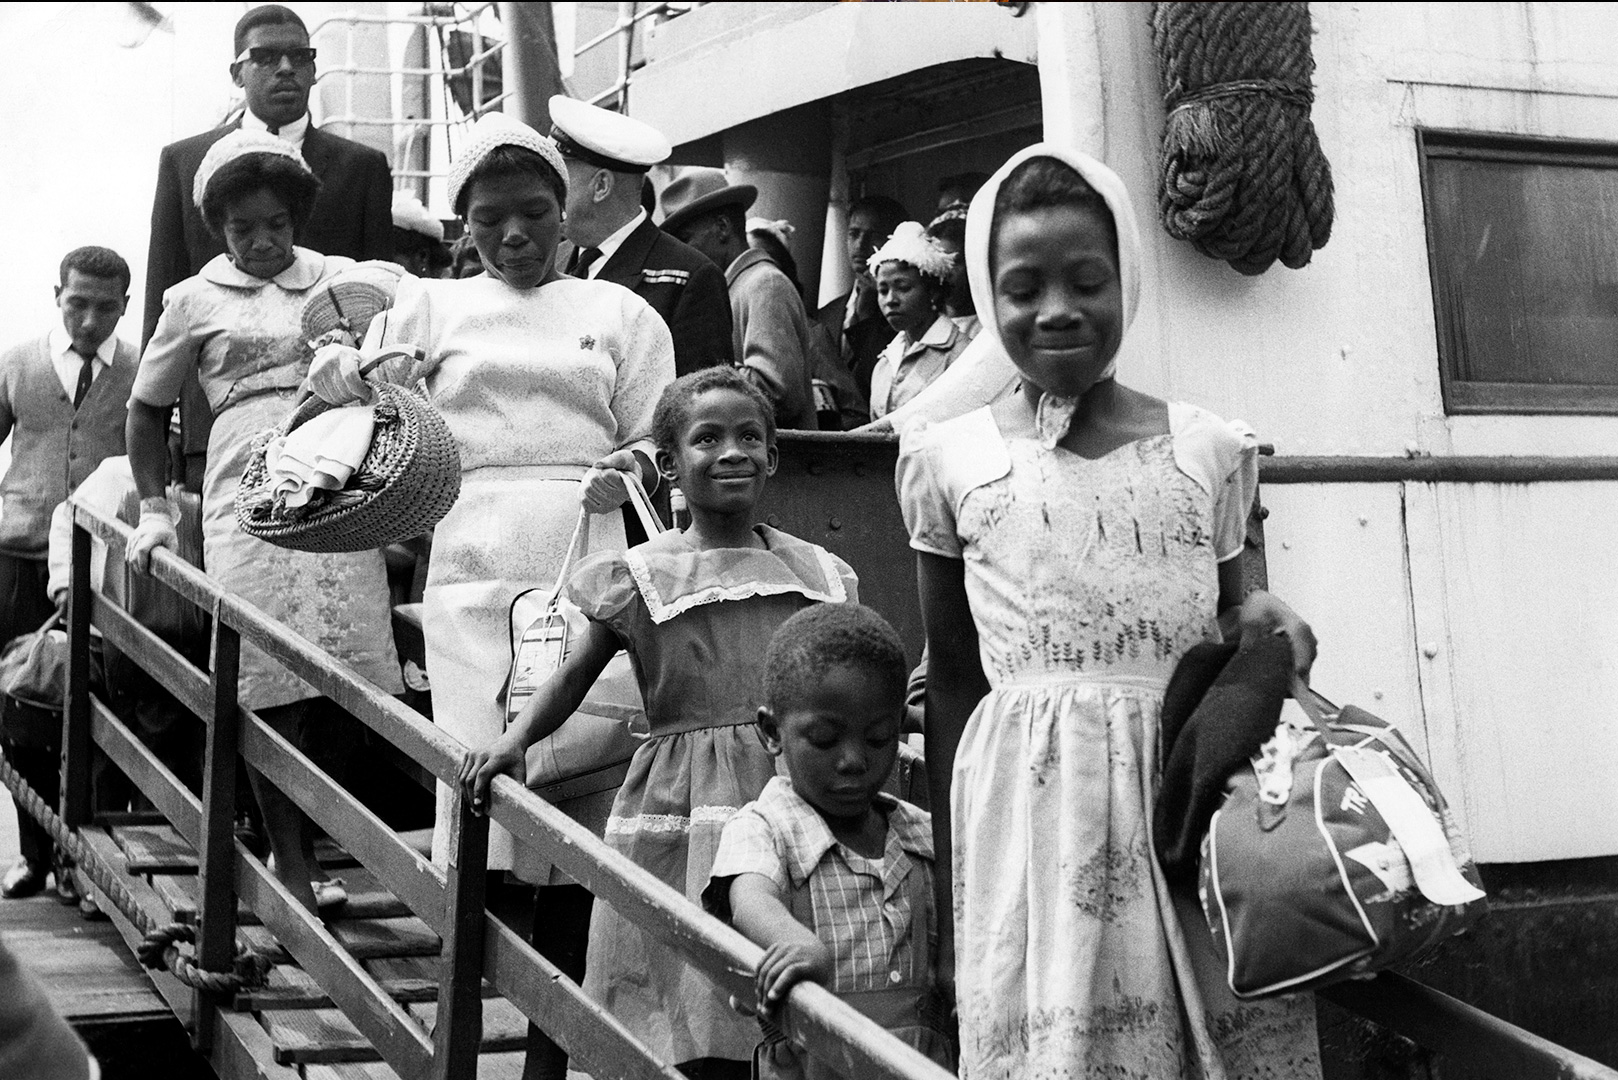 Windrush 75: Using our shared past to bring people together